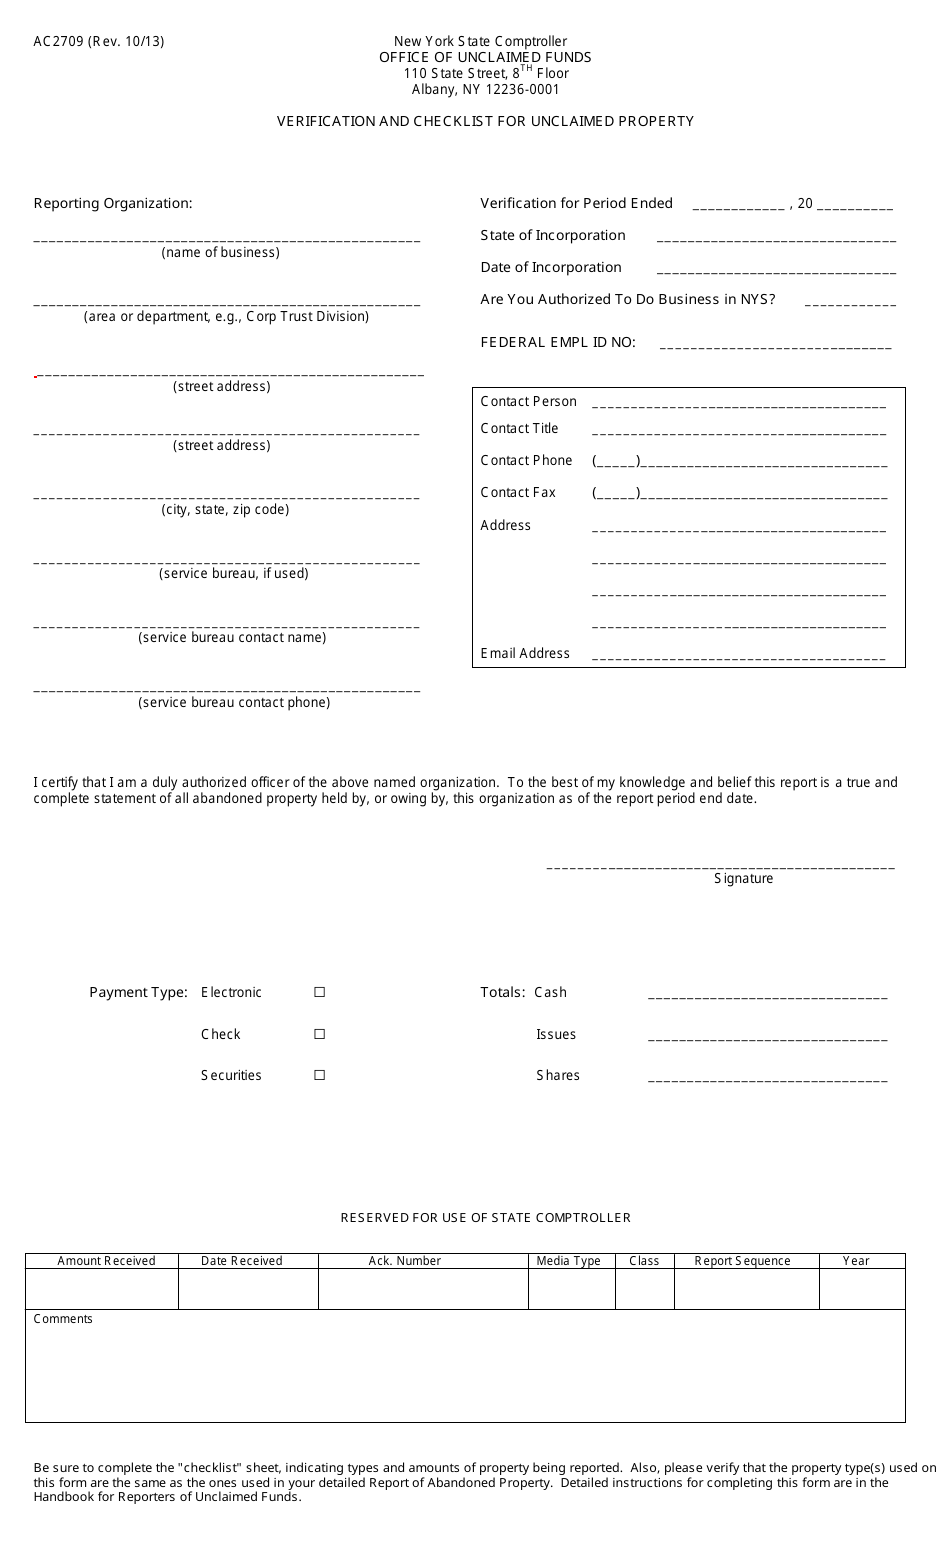 Form AC2709 Verification and Checklist for Unclaimed Property - New York, Page 1